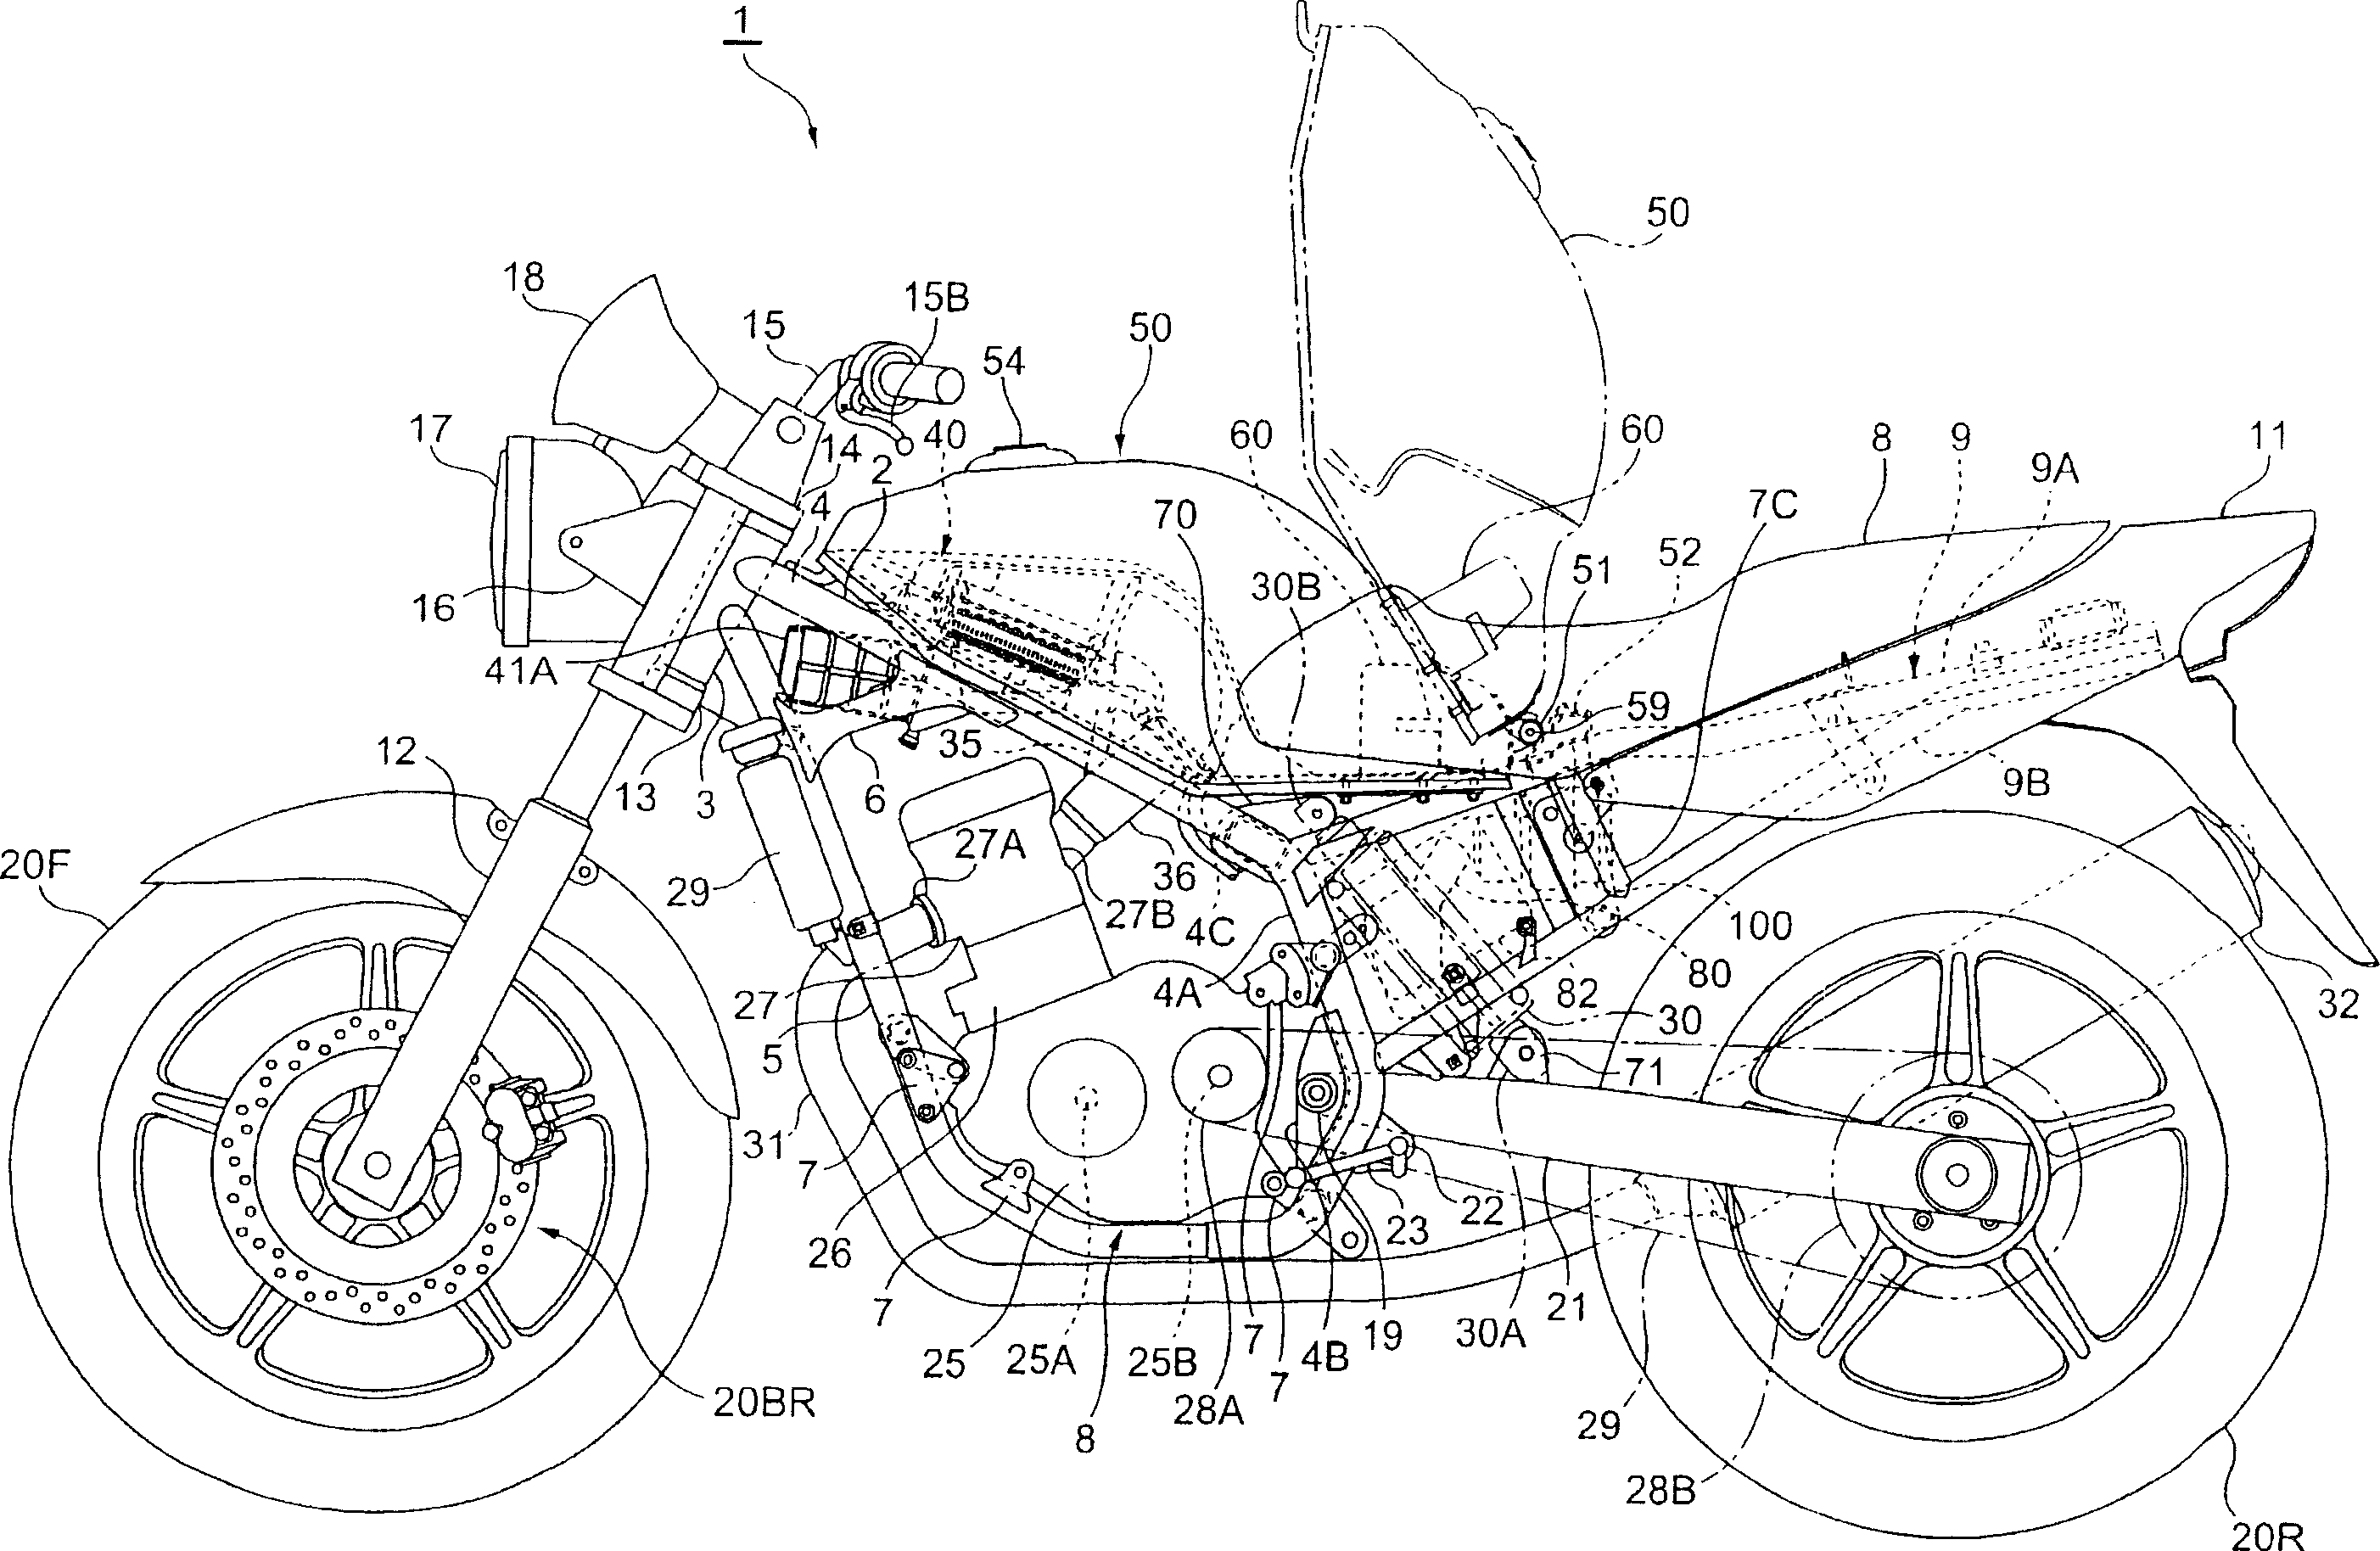 Rear buffer configuring structure of two-wheels motor vehicle